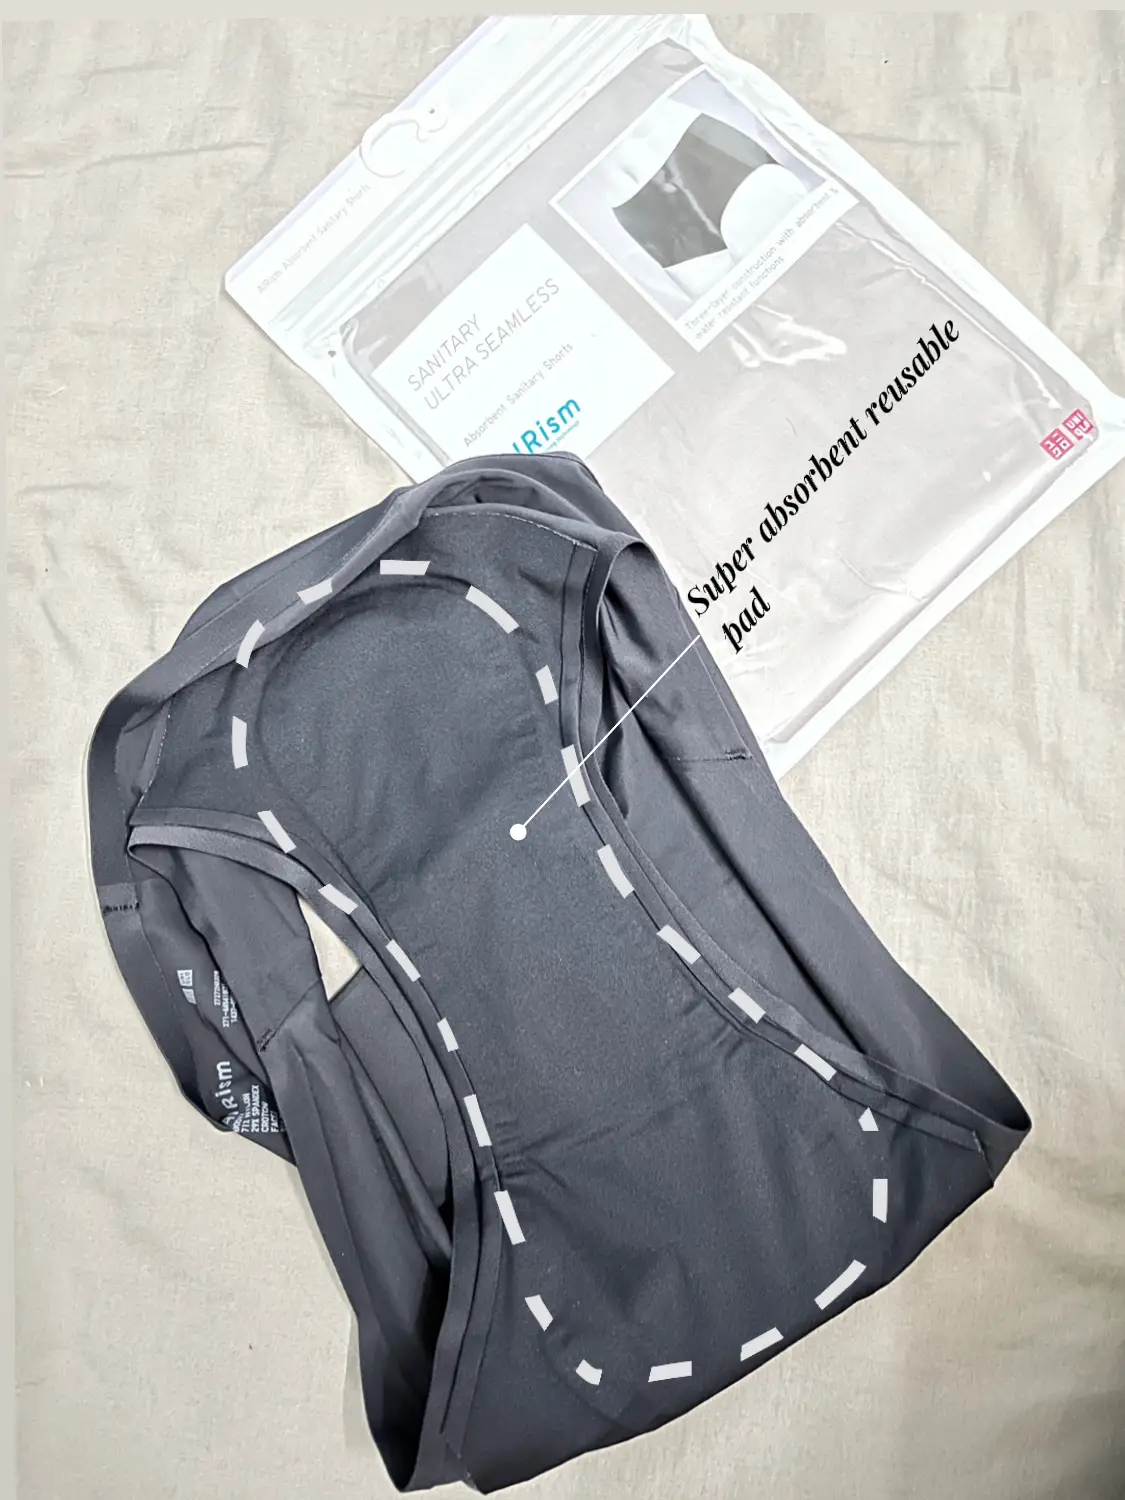 Must buy from Uniqlo! Body shaper from Uniqlo!